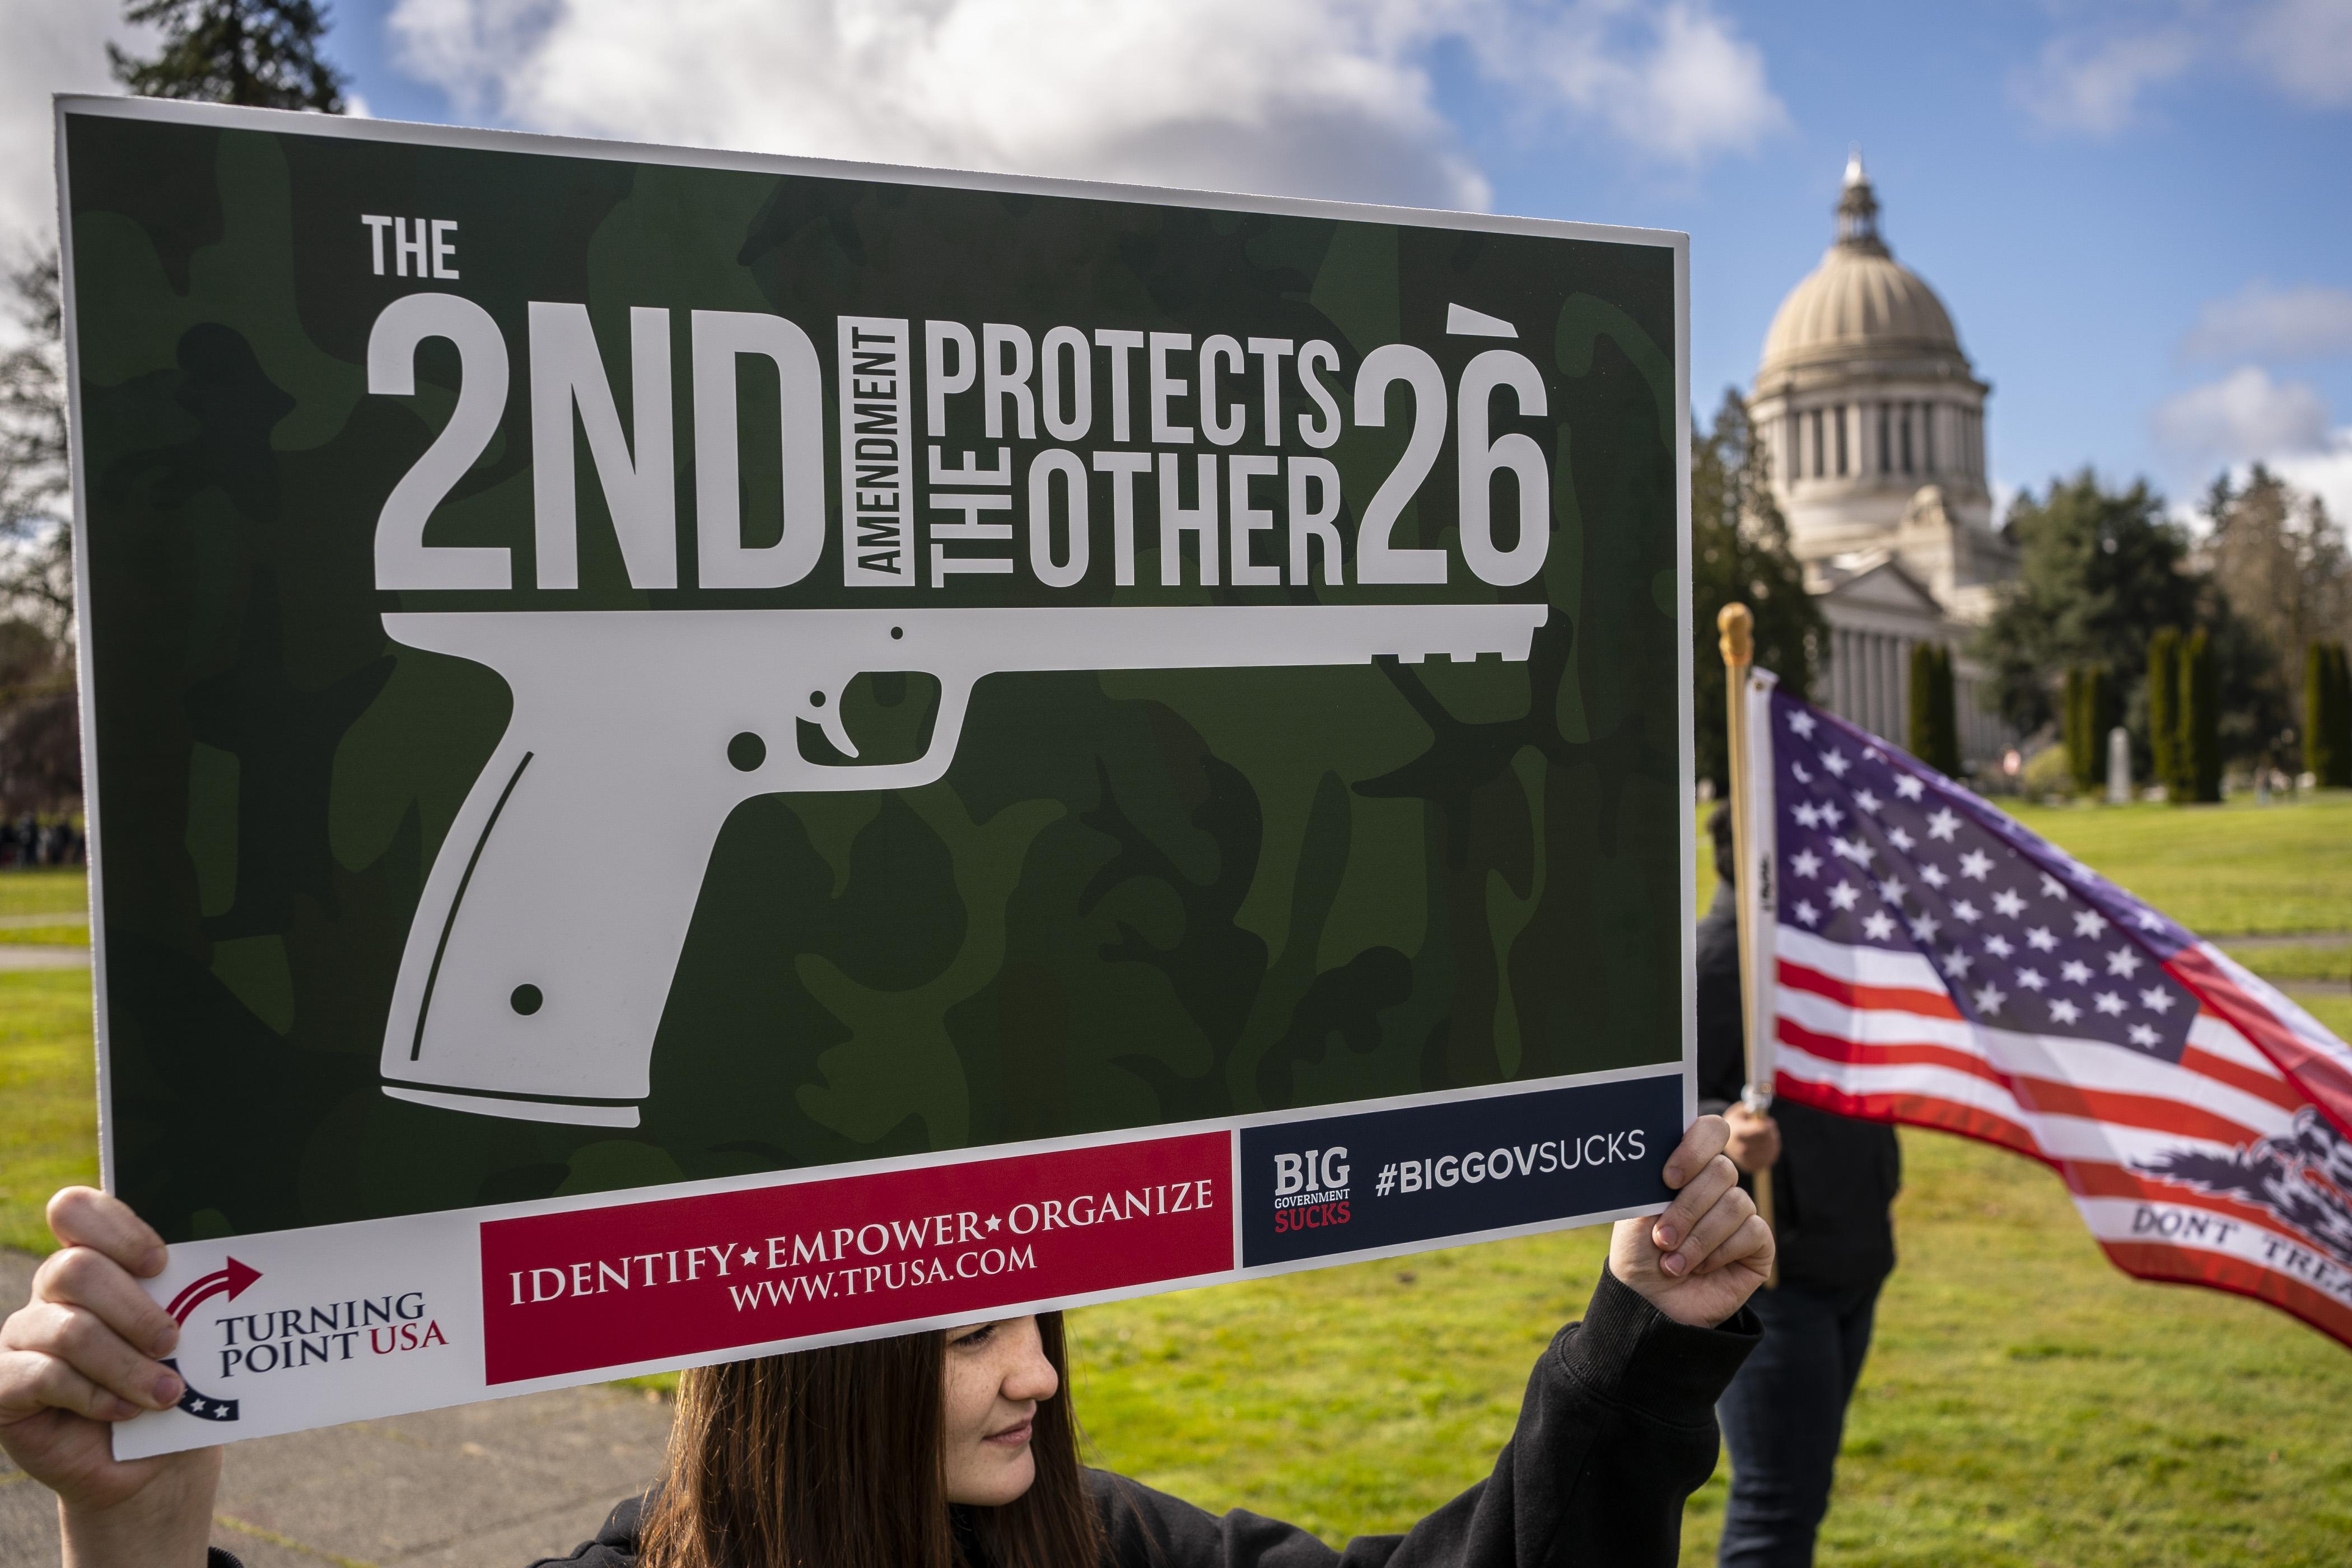 Woman holds up sign that reads "The 2nd Amendment Protects the Other 26" with the words shaped like they're part of a gun.